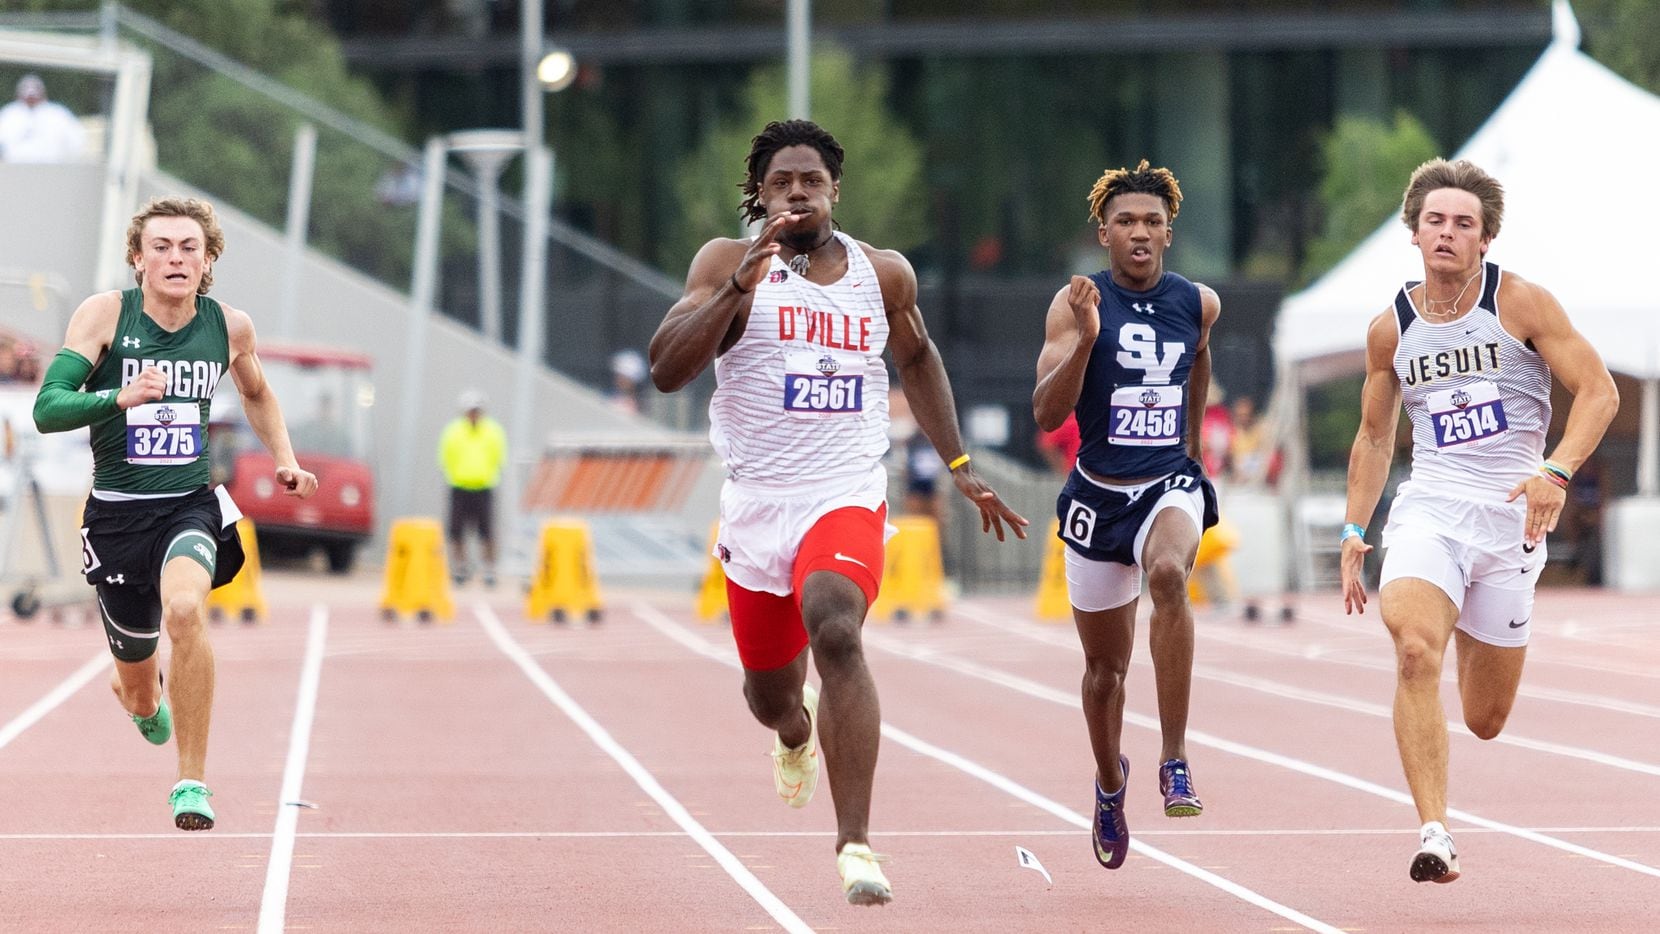 Duncanville's Pierre Goree (center, No. 2561) sprints to victory in the Class 6A 100 meters...